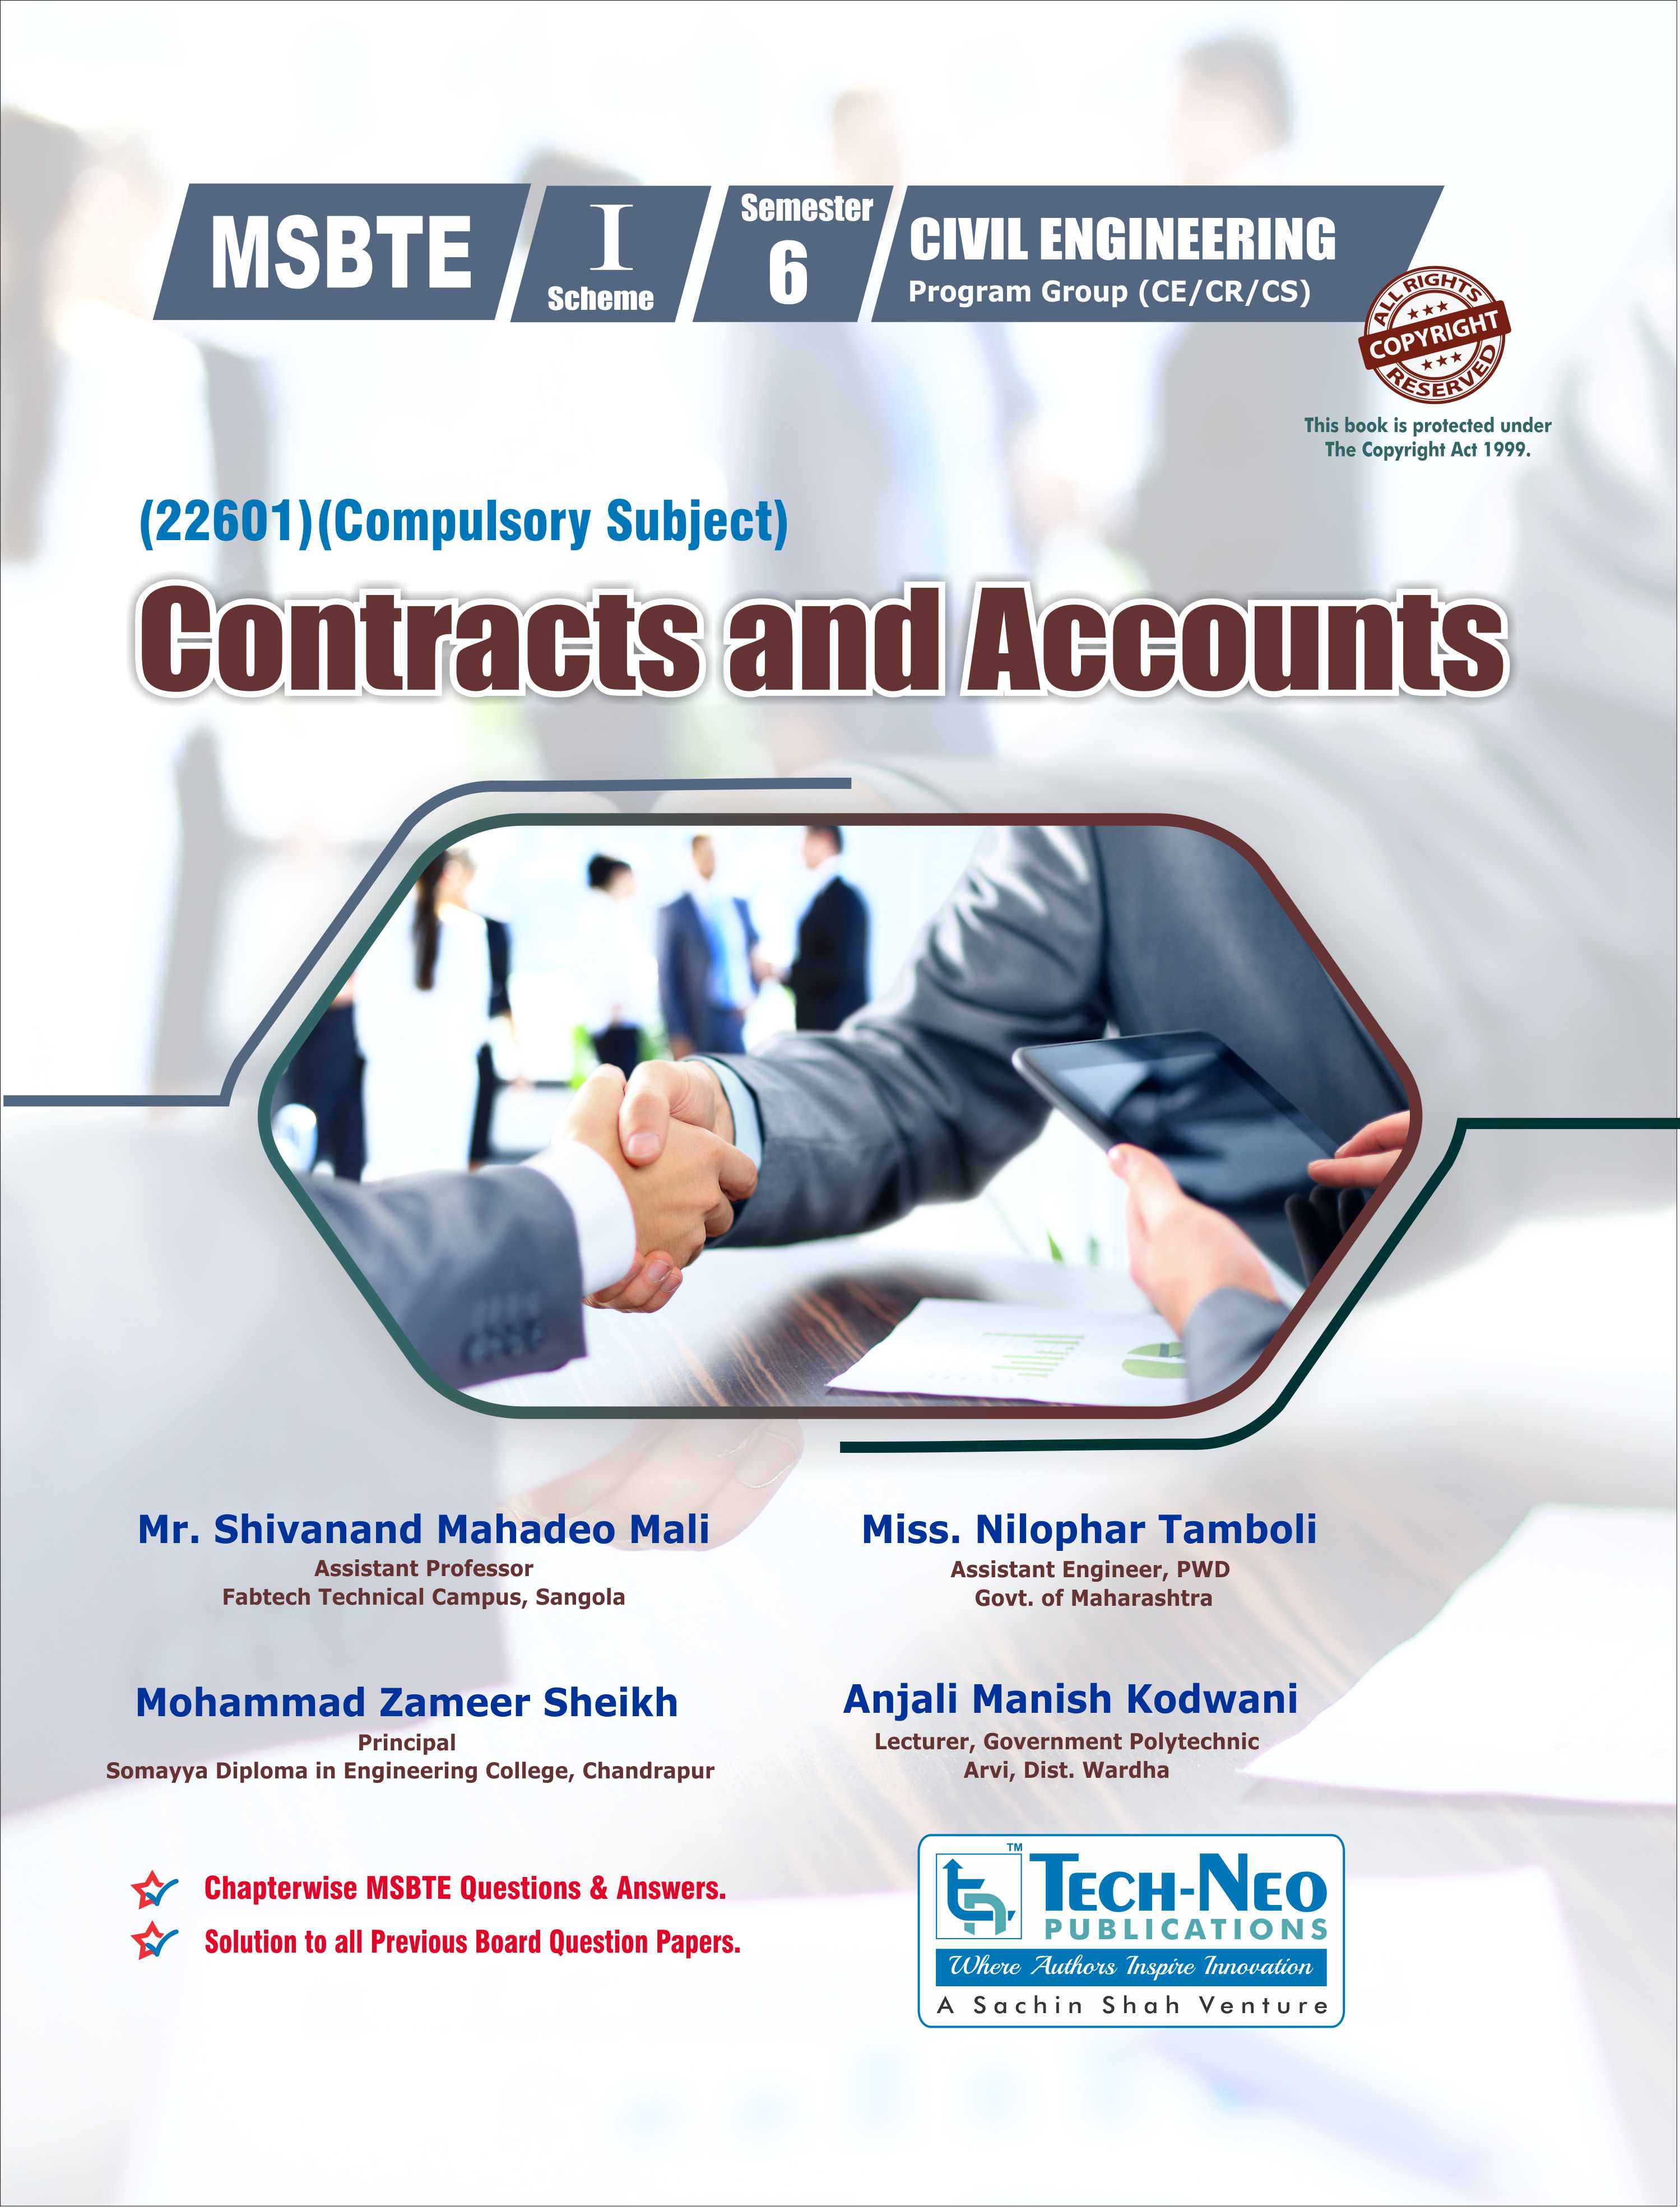 Contracts and Accounts